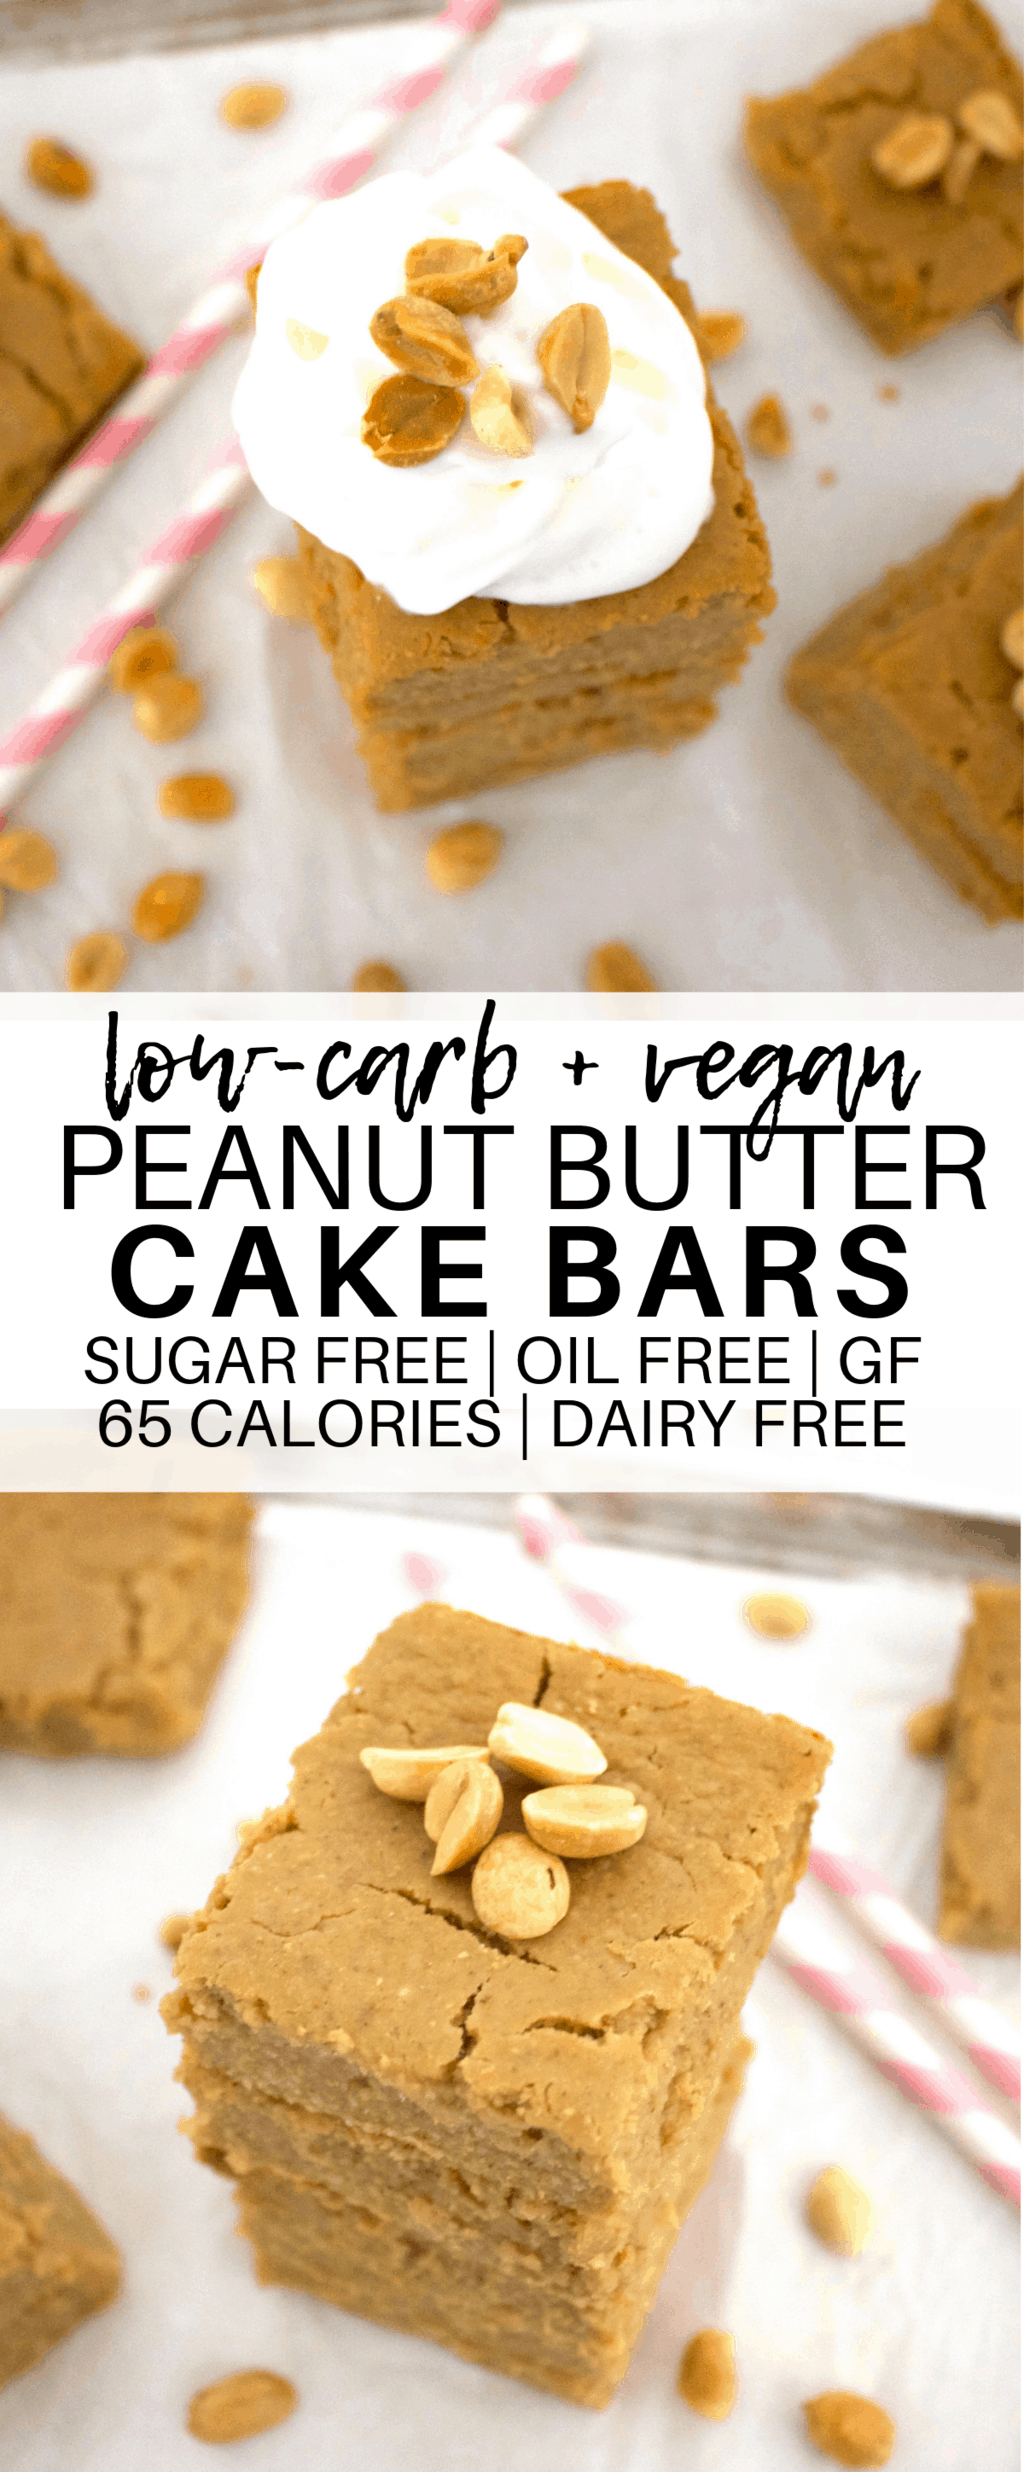 These AMAZING Vegan Peanut Butter Cake Bars taste like a sinfully delicious treat, but they're actually super healthy for you! Only 66 calories each, gluten-free, sugar-free, oil-free, and low-carb.